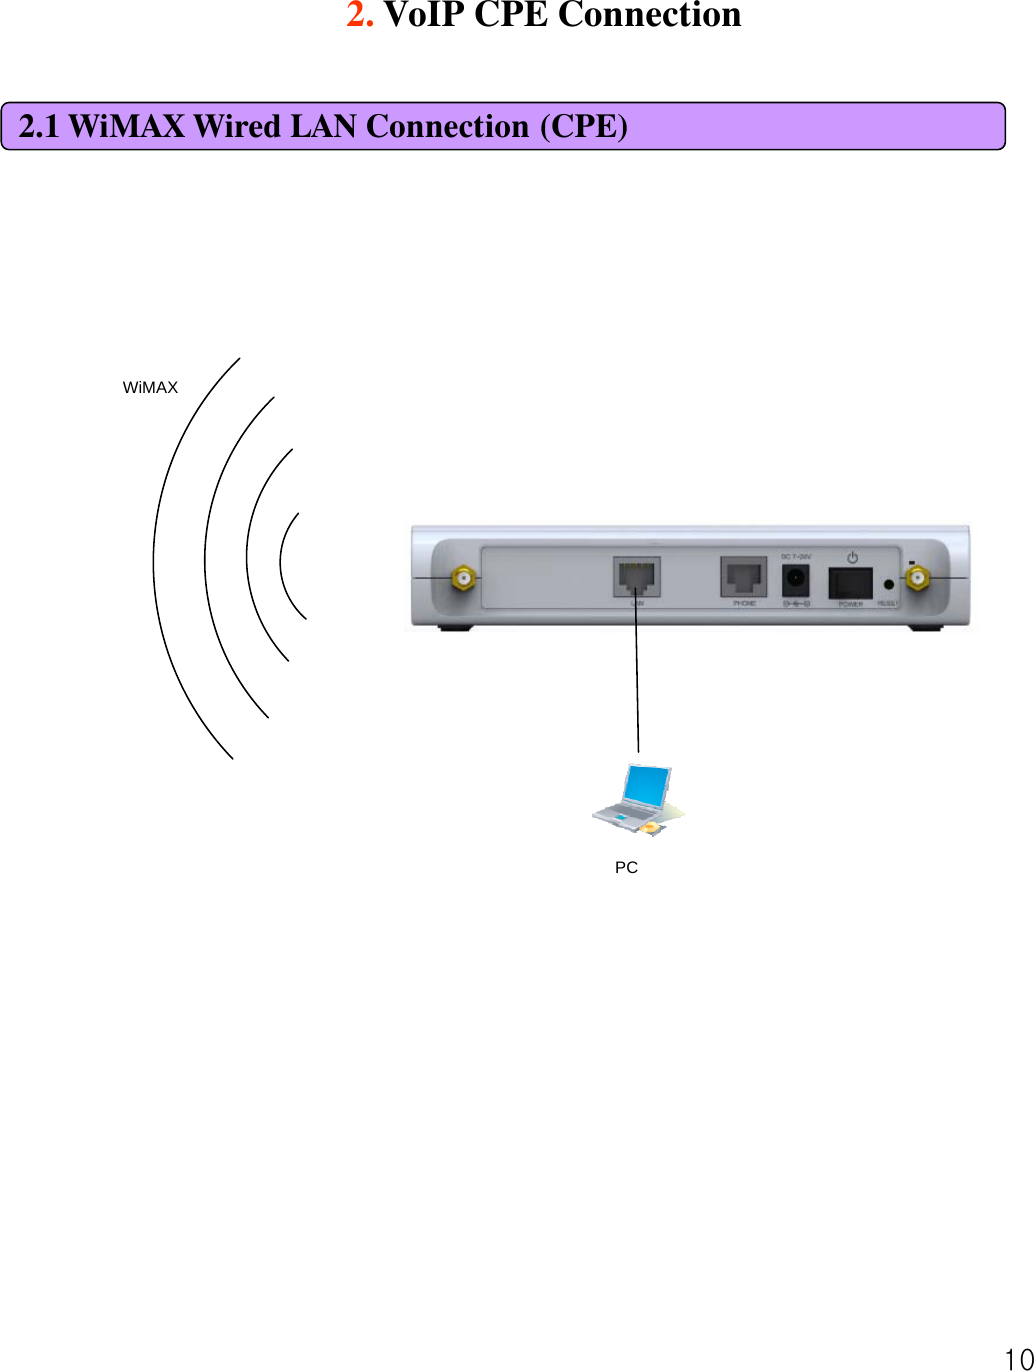 102.1 WiMAX Wired LAN Connection (CPE)2. VoIP CPE ConnectionPCWiMAX